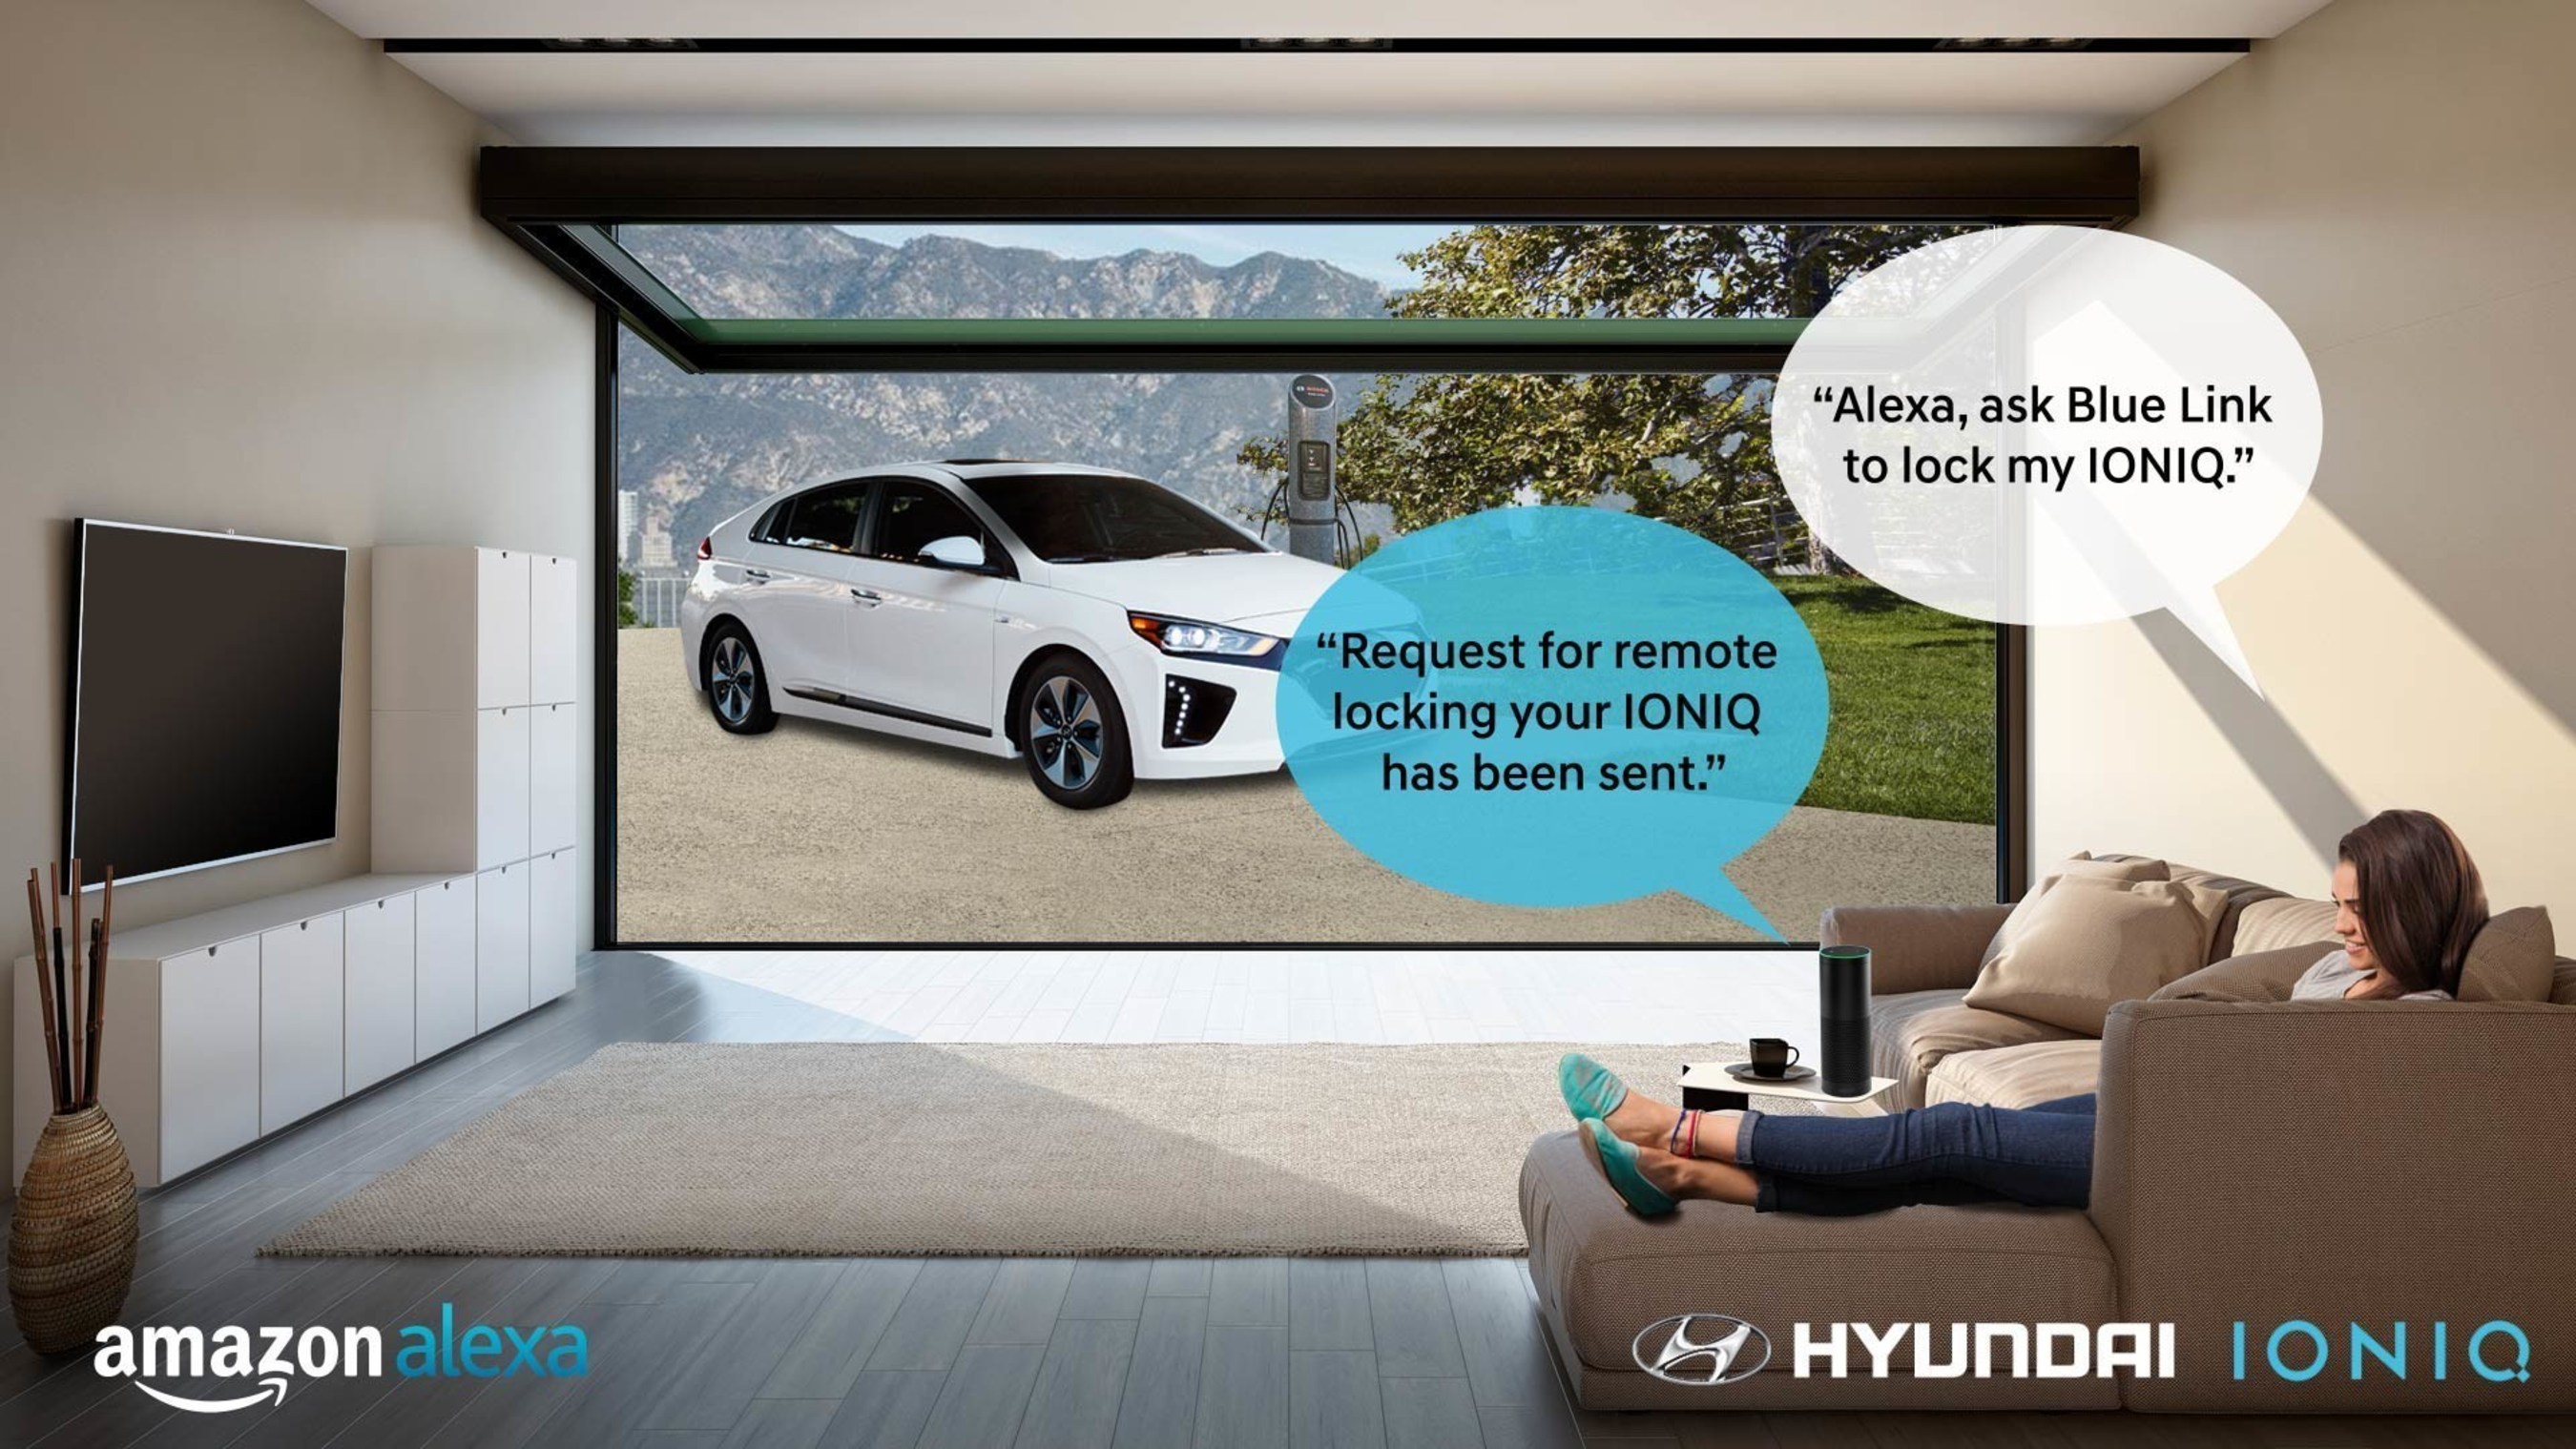 Fountain Valley, Calif., Nov. 15, 2016 - Hyundai becomes the first mainstream automaker to connect cars with homes using Amazon Echo and its new Blue Link skill for Amazon Alexa.